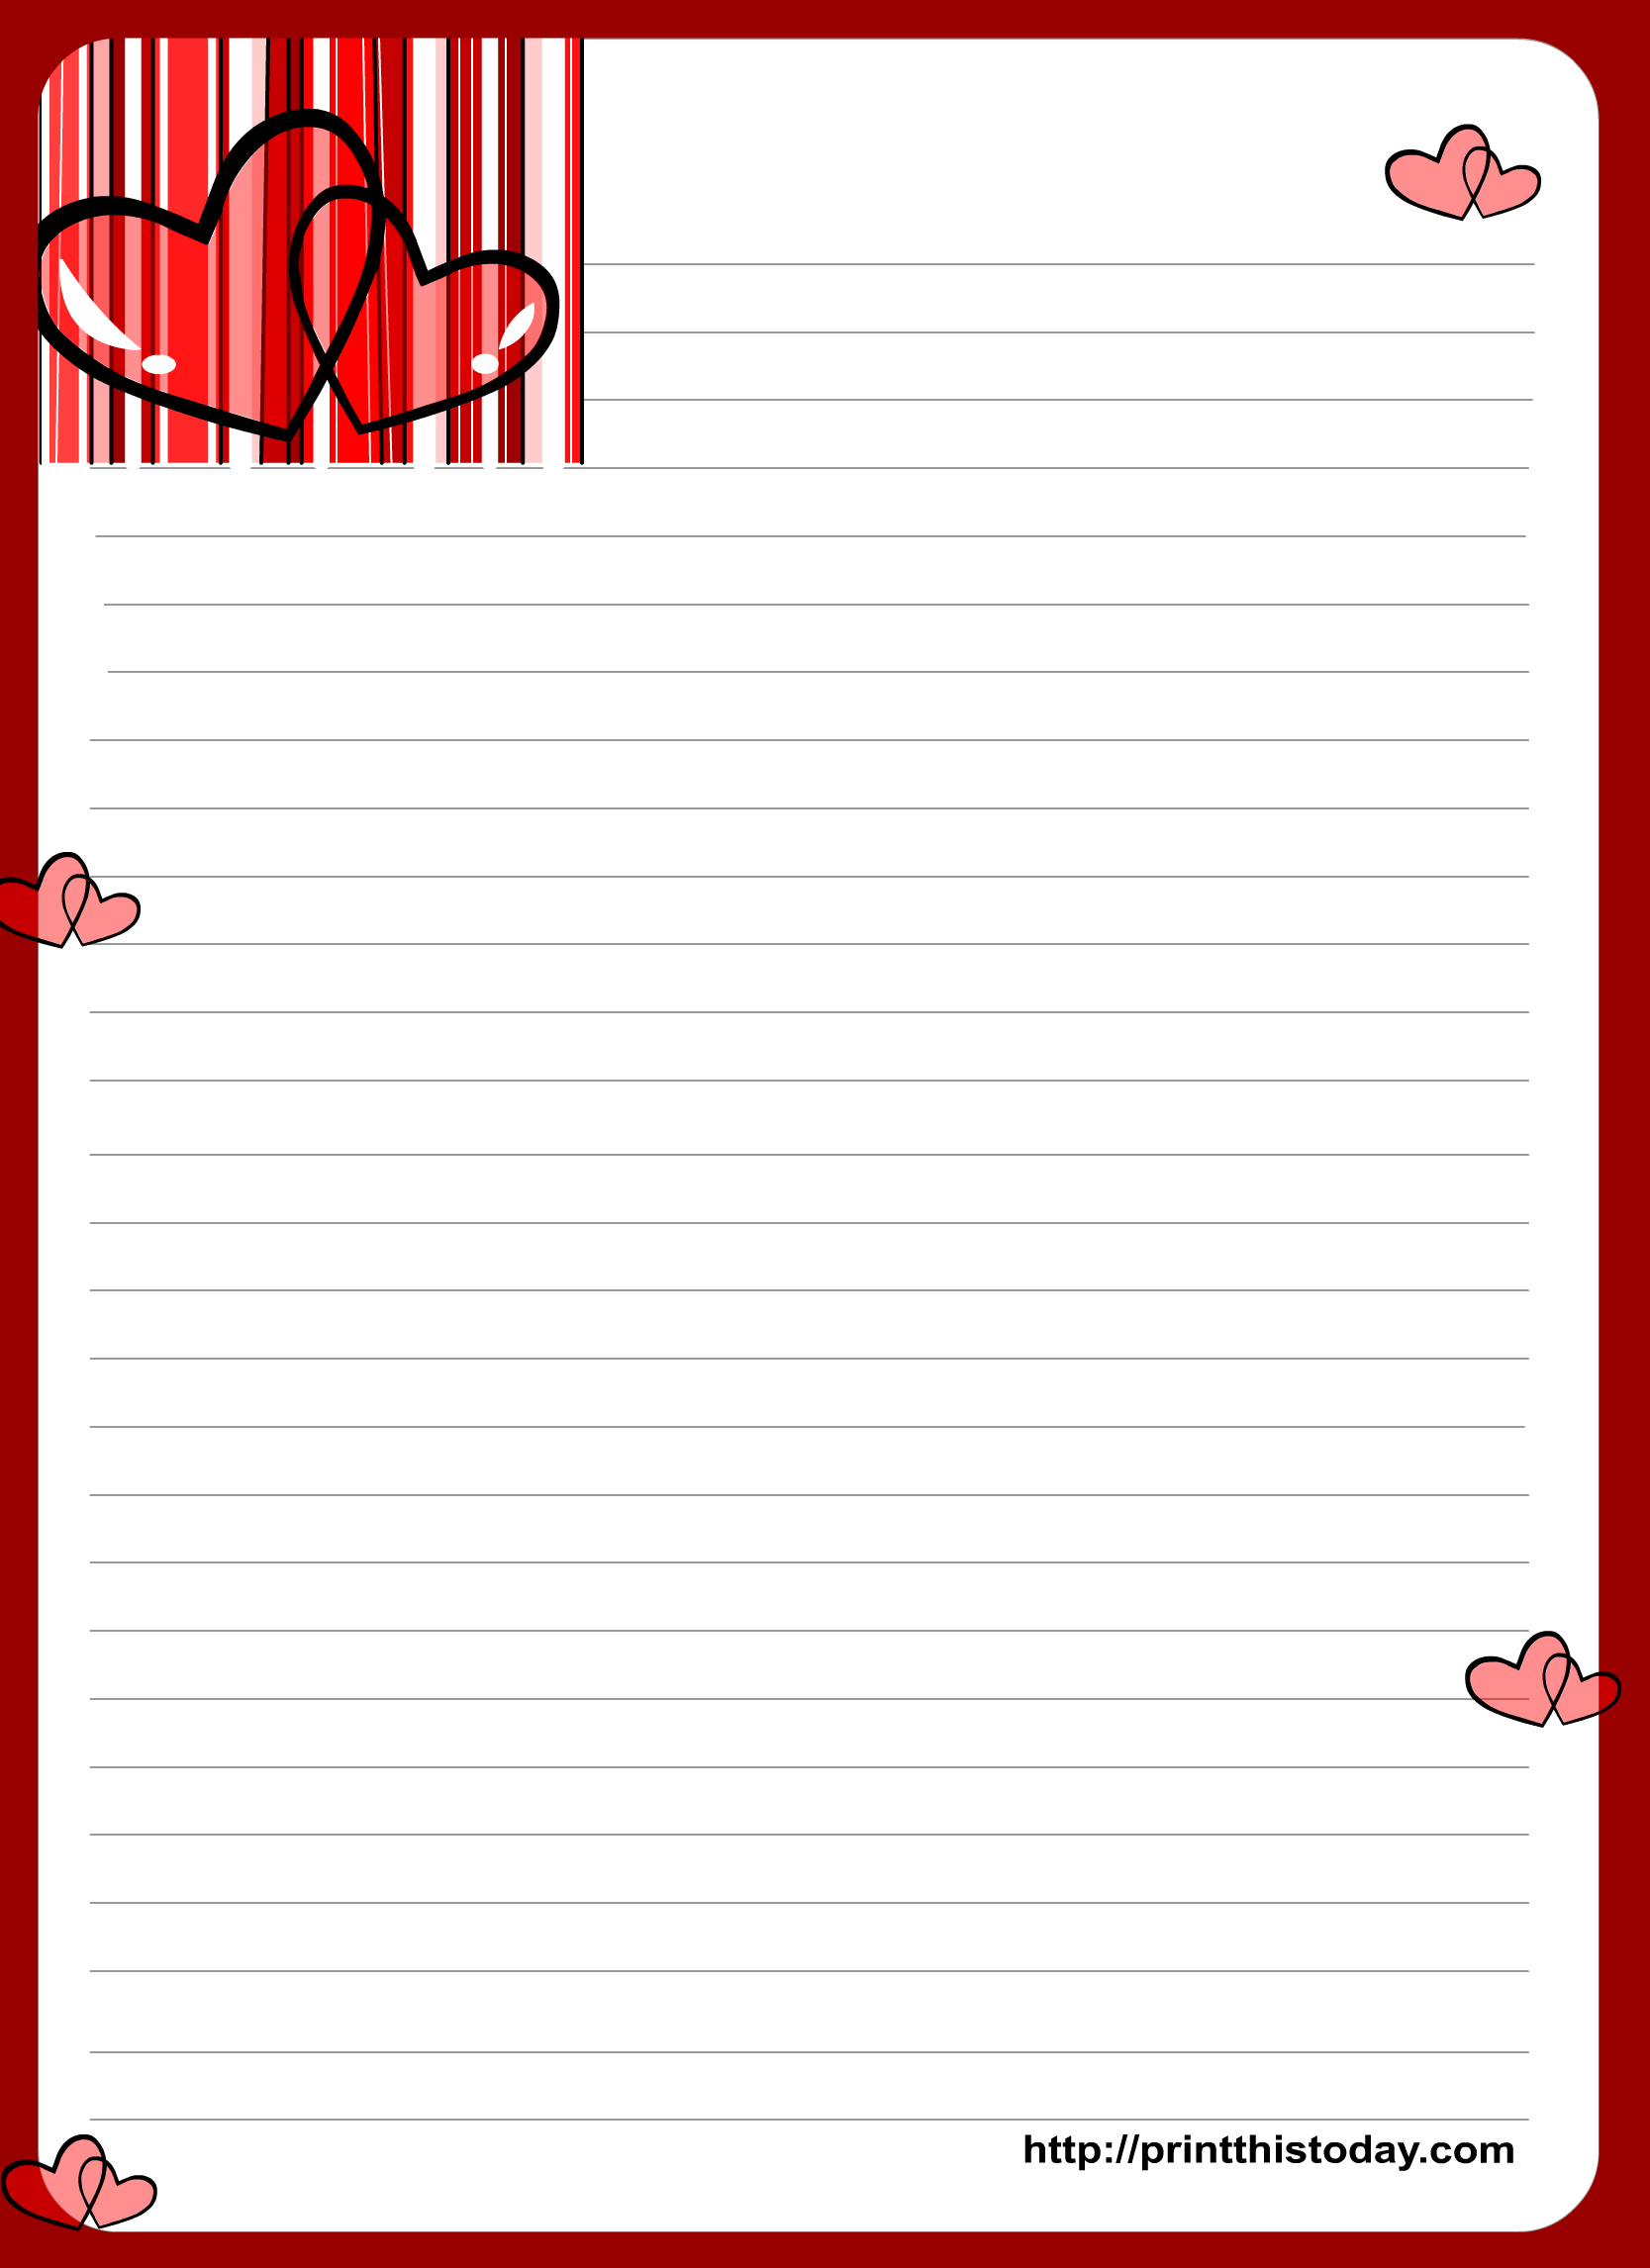 Love Letter Writing Paper With Hearts | Decorative Paper W/ Lines - Free Printable Love Letter Paper